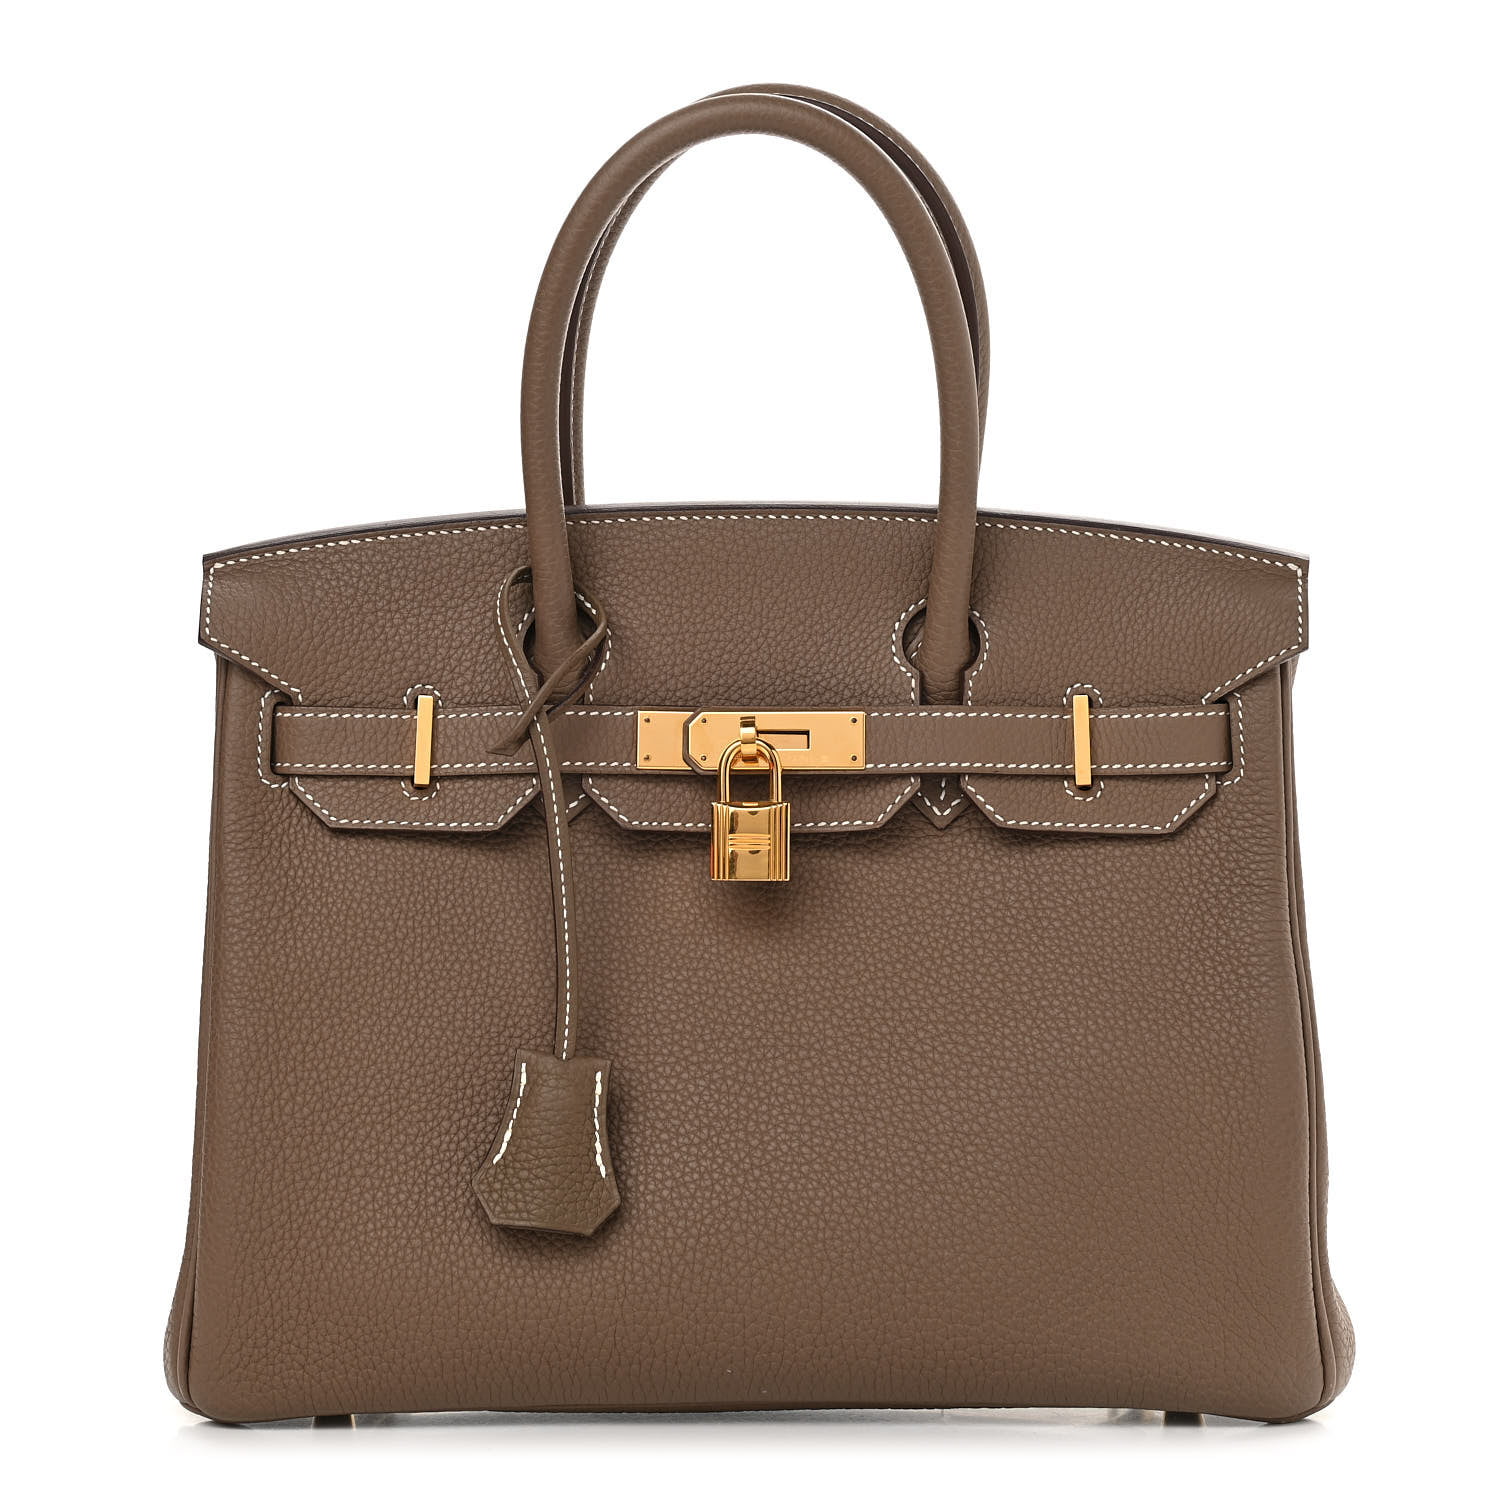 HERMES KELLY 25 ONE YEAR REVIEW  SWIFT LEATHER WEAR & TEAR + HOW